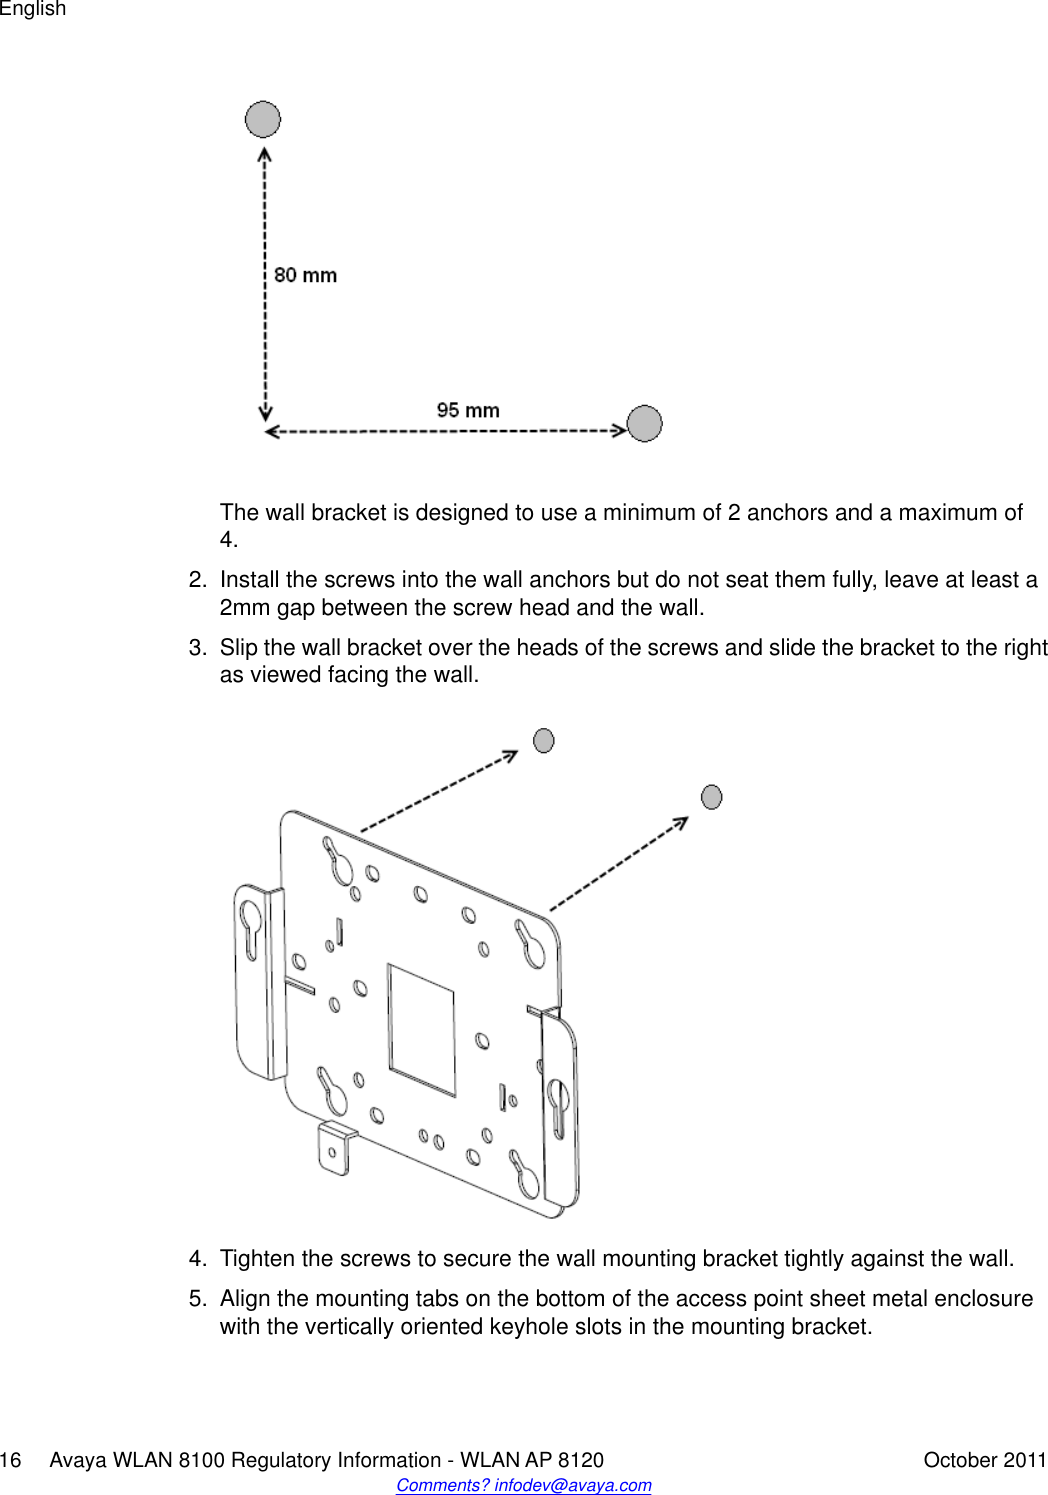 The wall bracket is designed to use a minimum of 2 anchors and a maximum of4.2. Install the screws into the wall anchors but do not seat them fully, leave at least a2mm gap between the screw head and the wall.3. Slip the wall bracket over the heads of the screws and slide the bracket to the rightas viewed facing the wall.4. Tighten the screws to secure the wall mounting bracket tightly against the wall.5. Align the mounting tabs on the bottom of the access point sheet metal enclosurewith the vertically oriented keyhole slots in the mounting bracket.English16     Avaya WLAN 8100 Regulatory Information - WLAN AP 8120 October 2011Comments? infodev@avaya.com